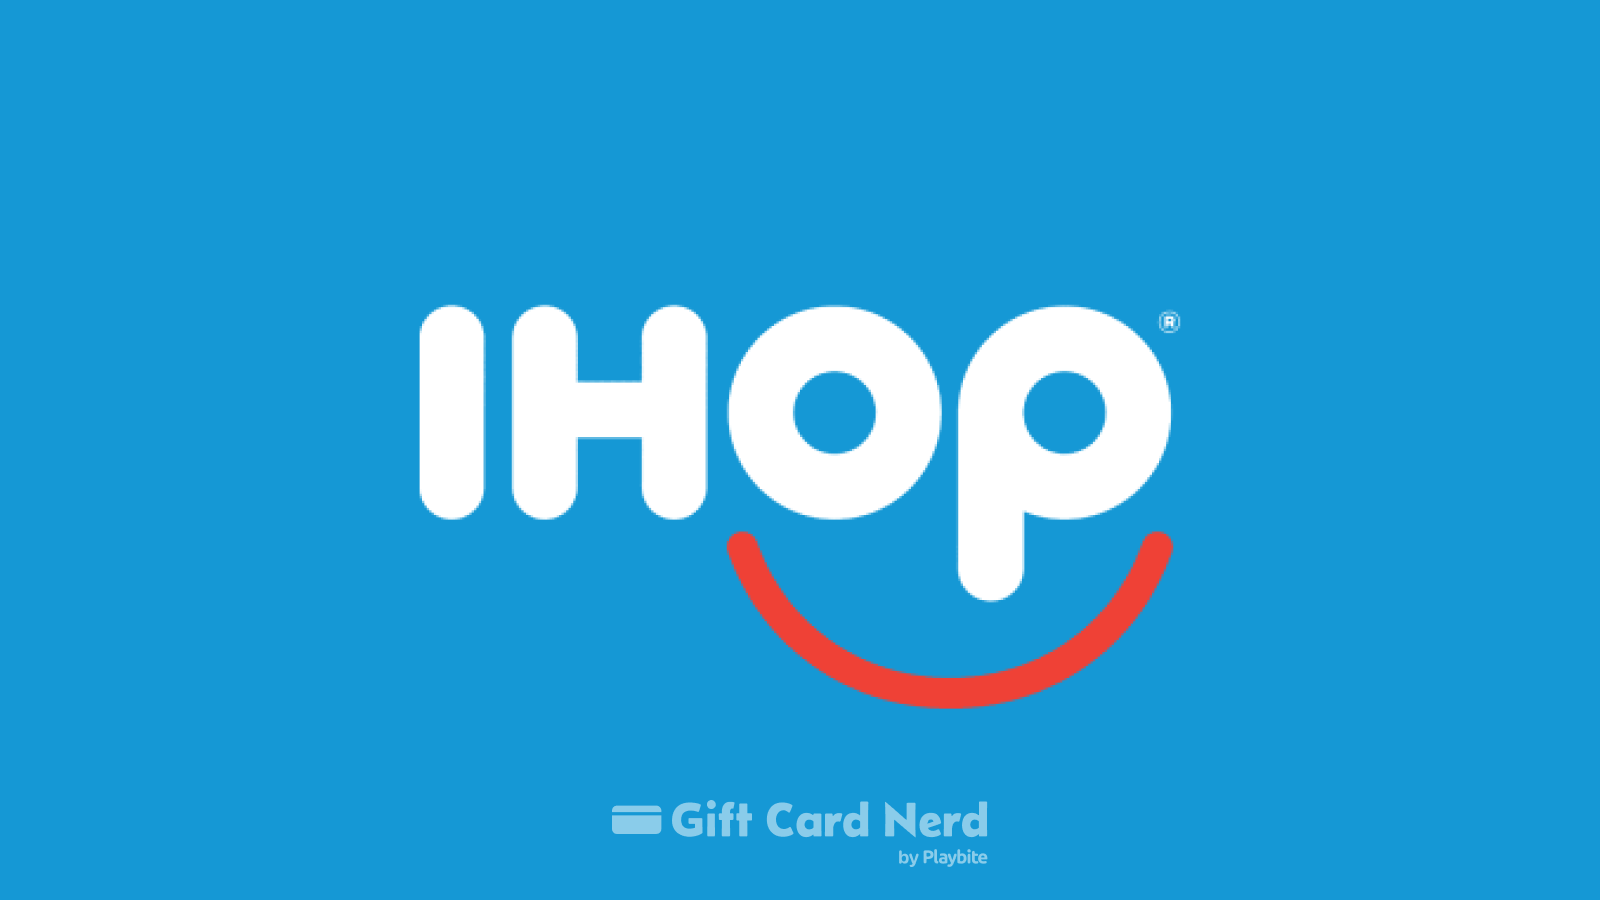 Can You Buy IHOP Gift Cards at Walmart?